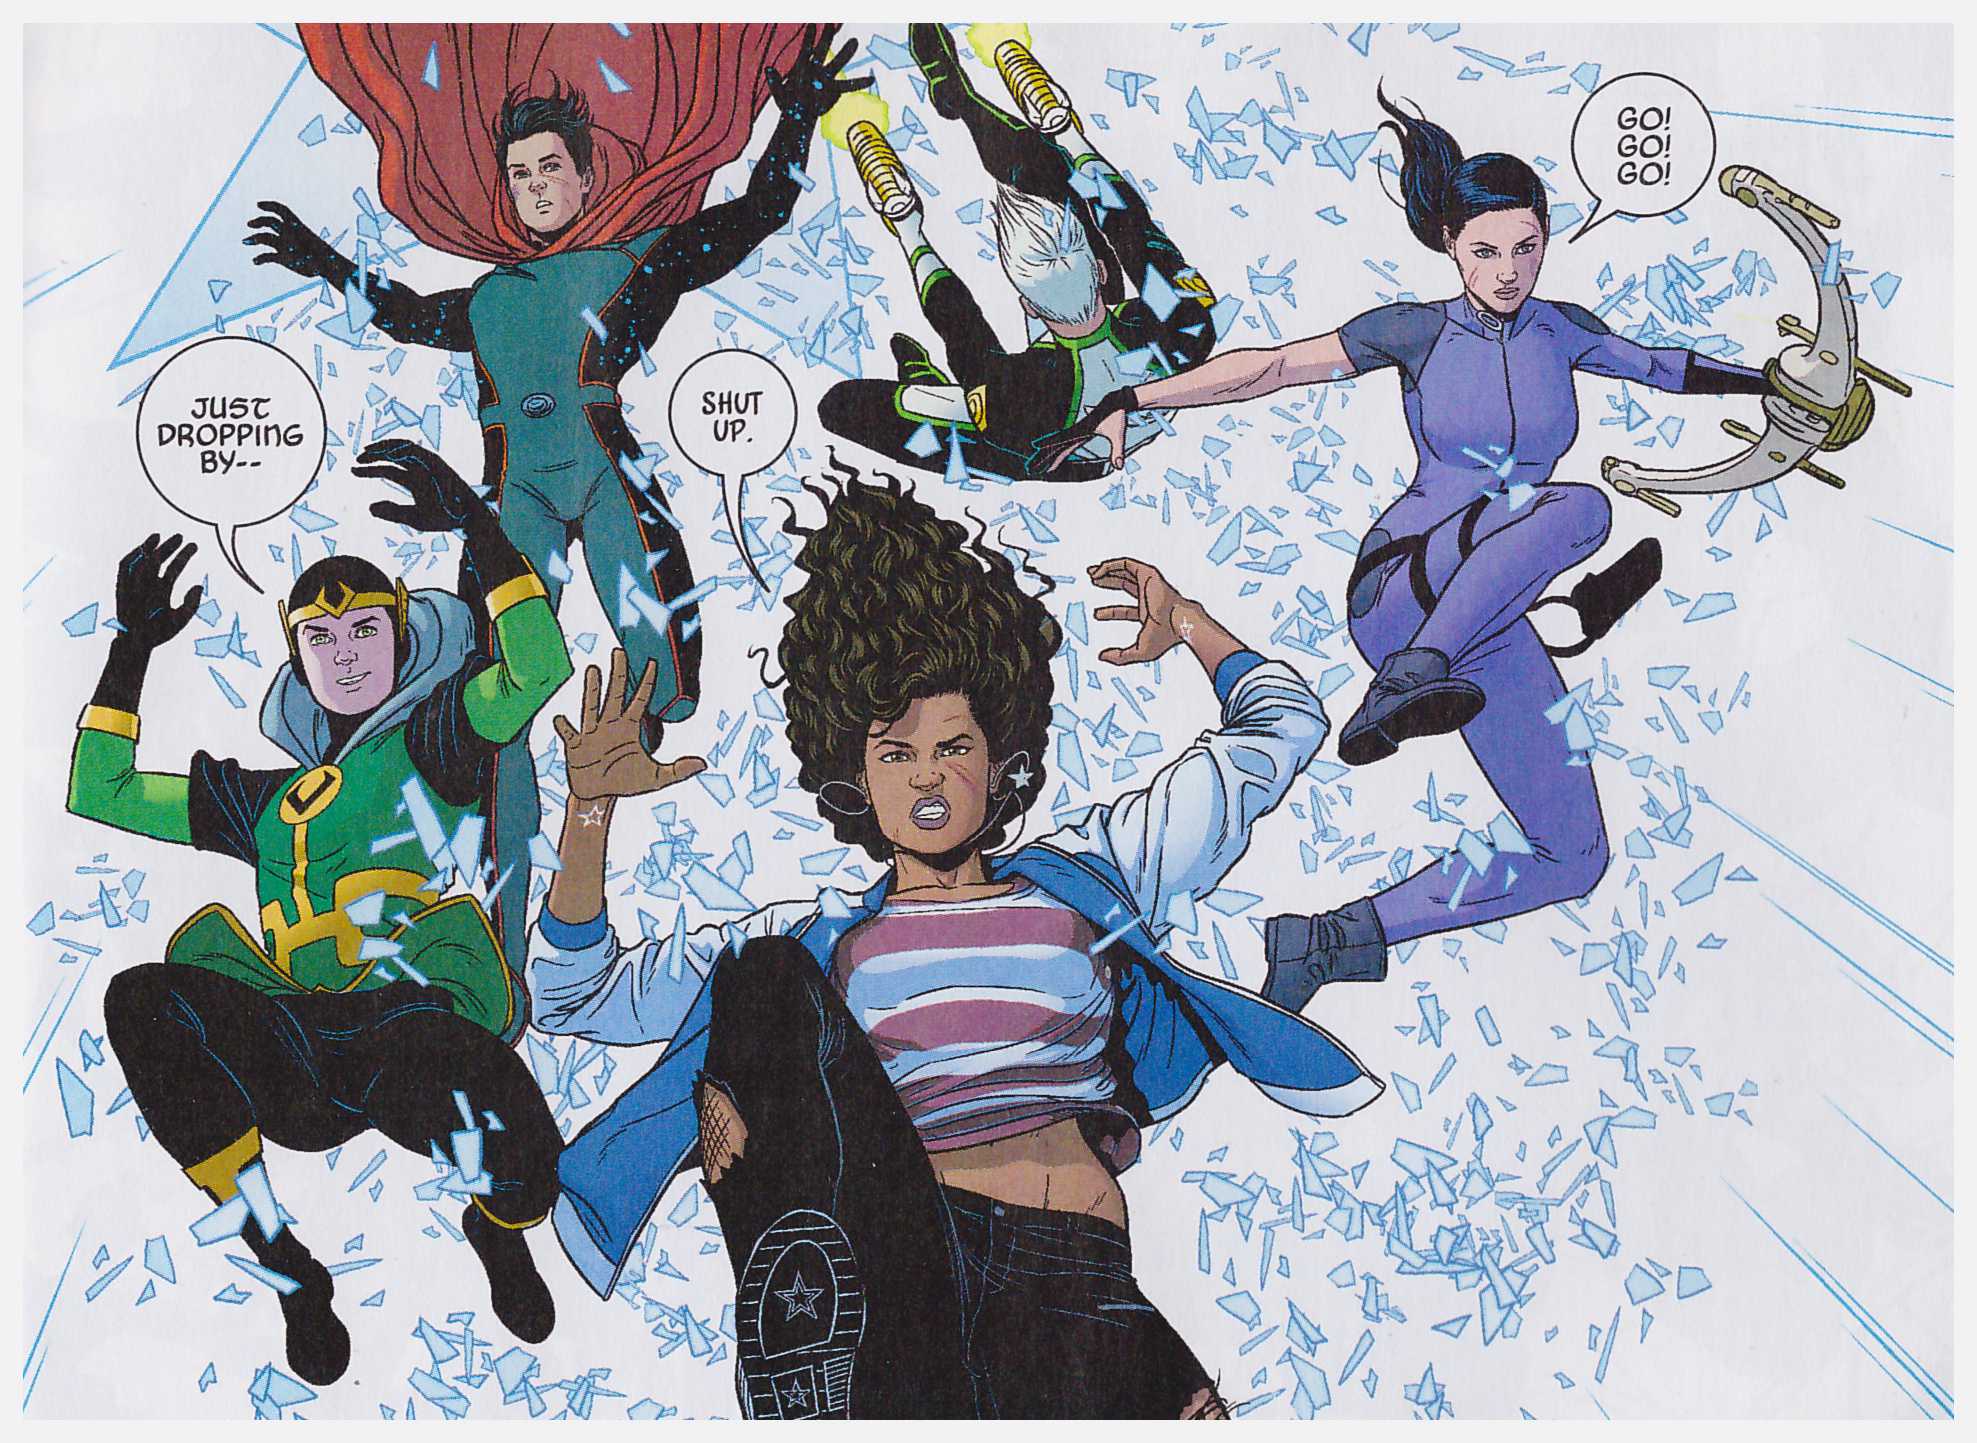 Young Avengers Omnibus